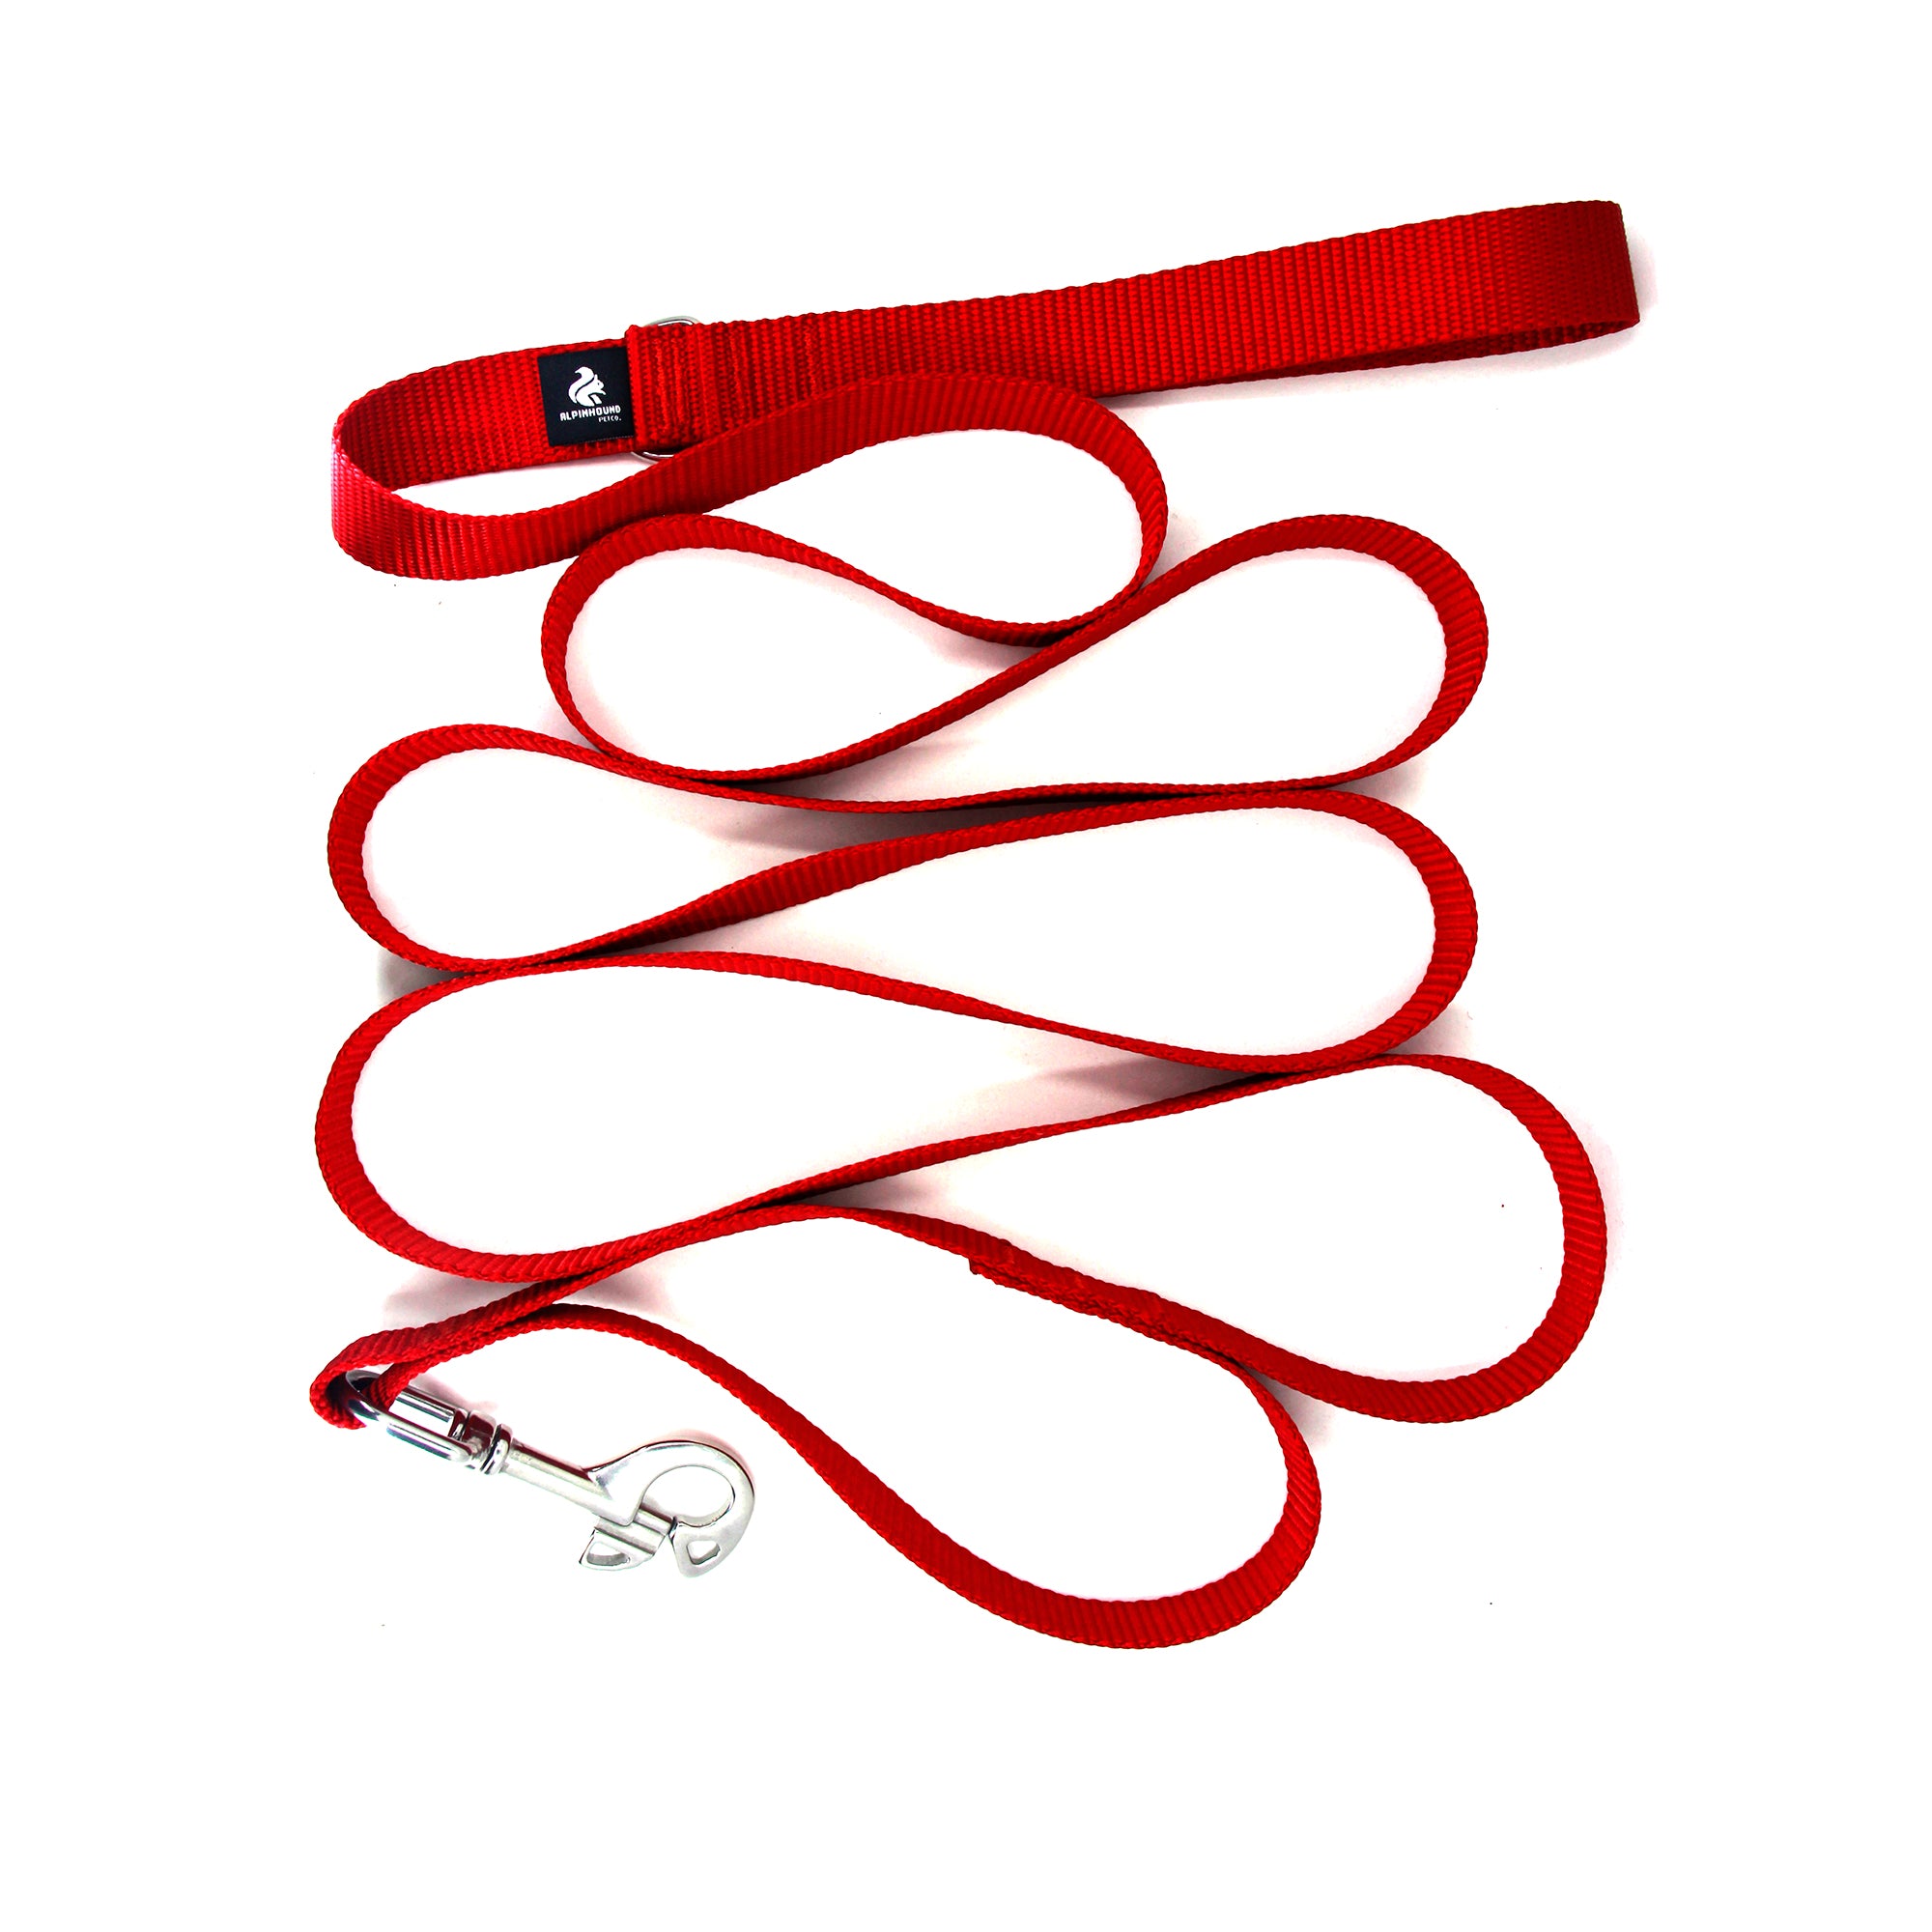 Leash with Stainless Steel Snaphook and D-Ring